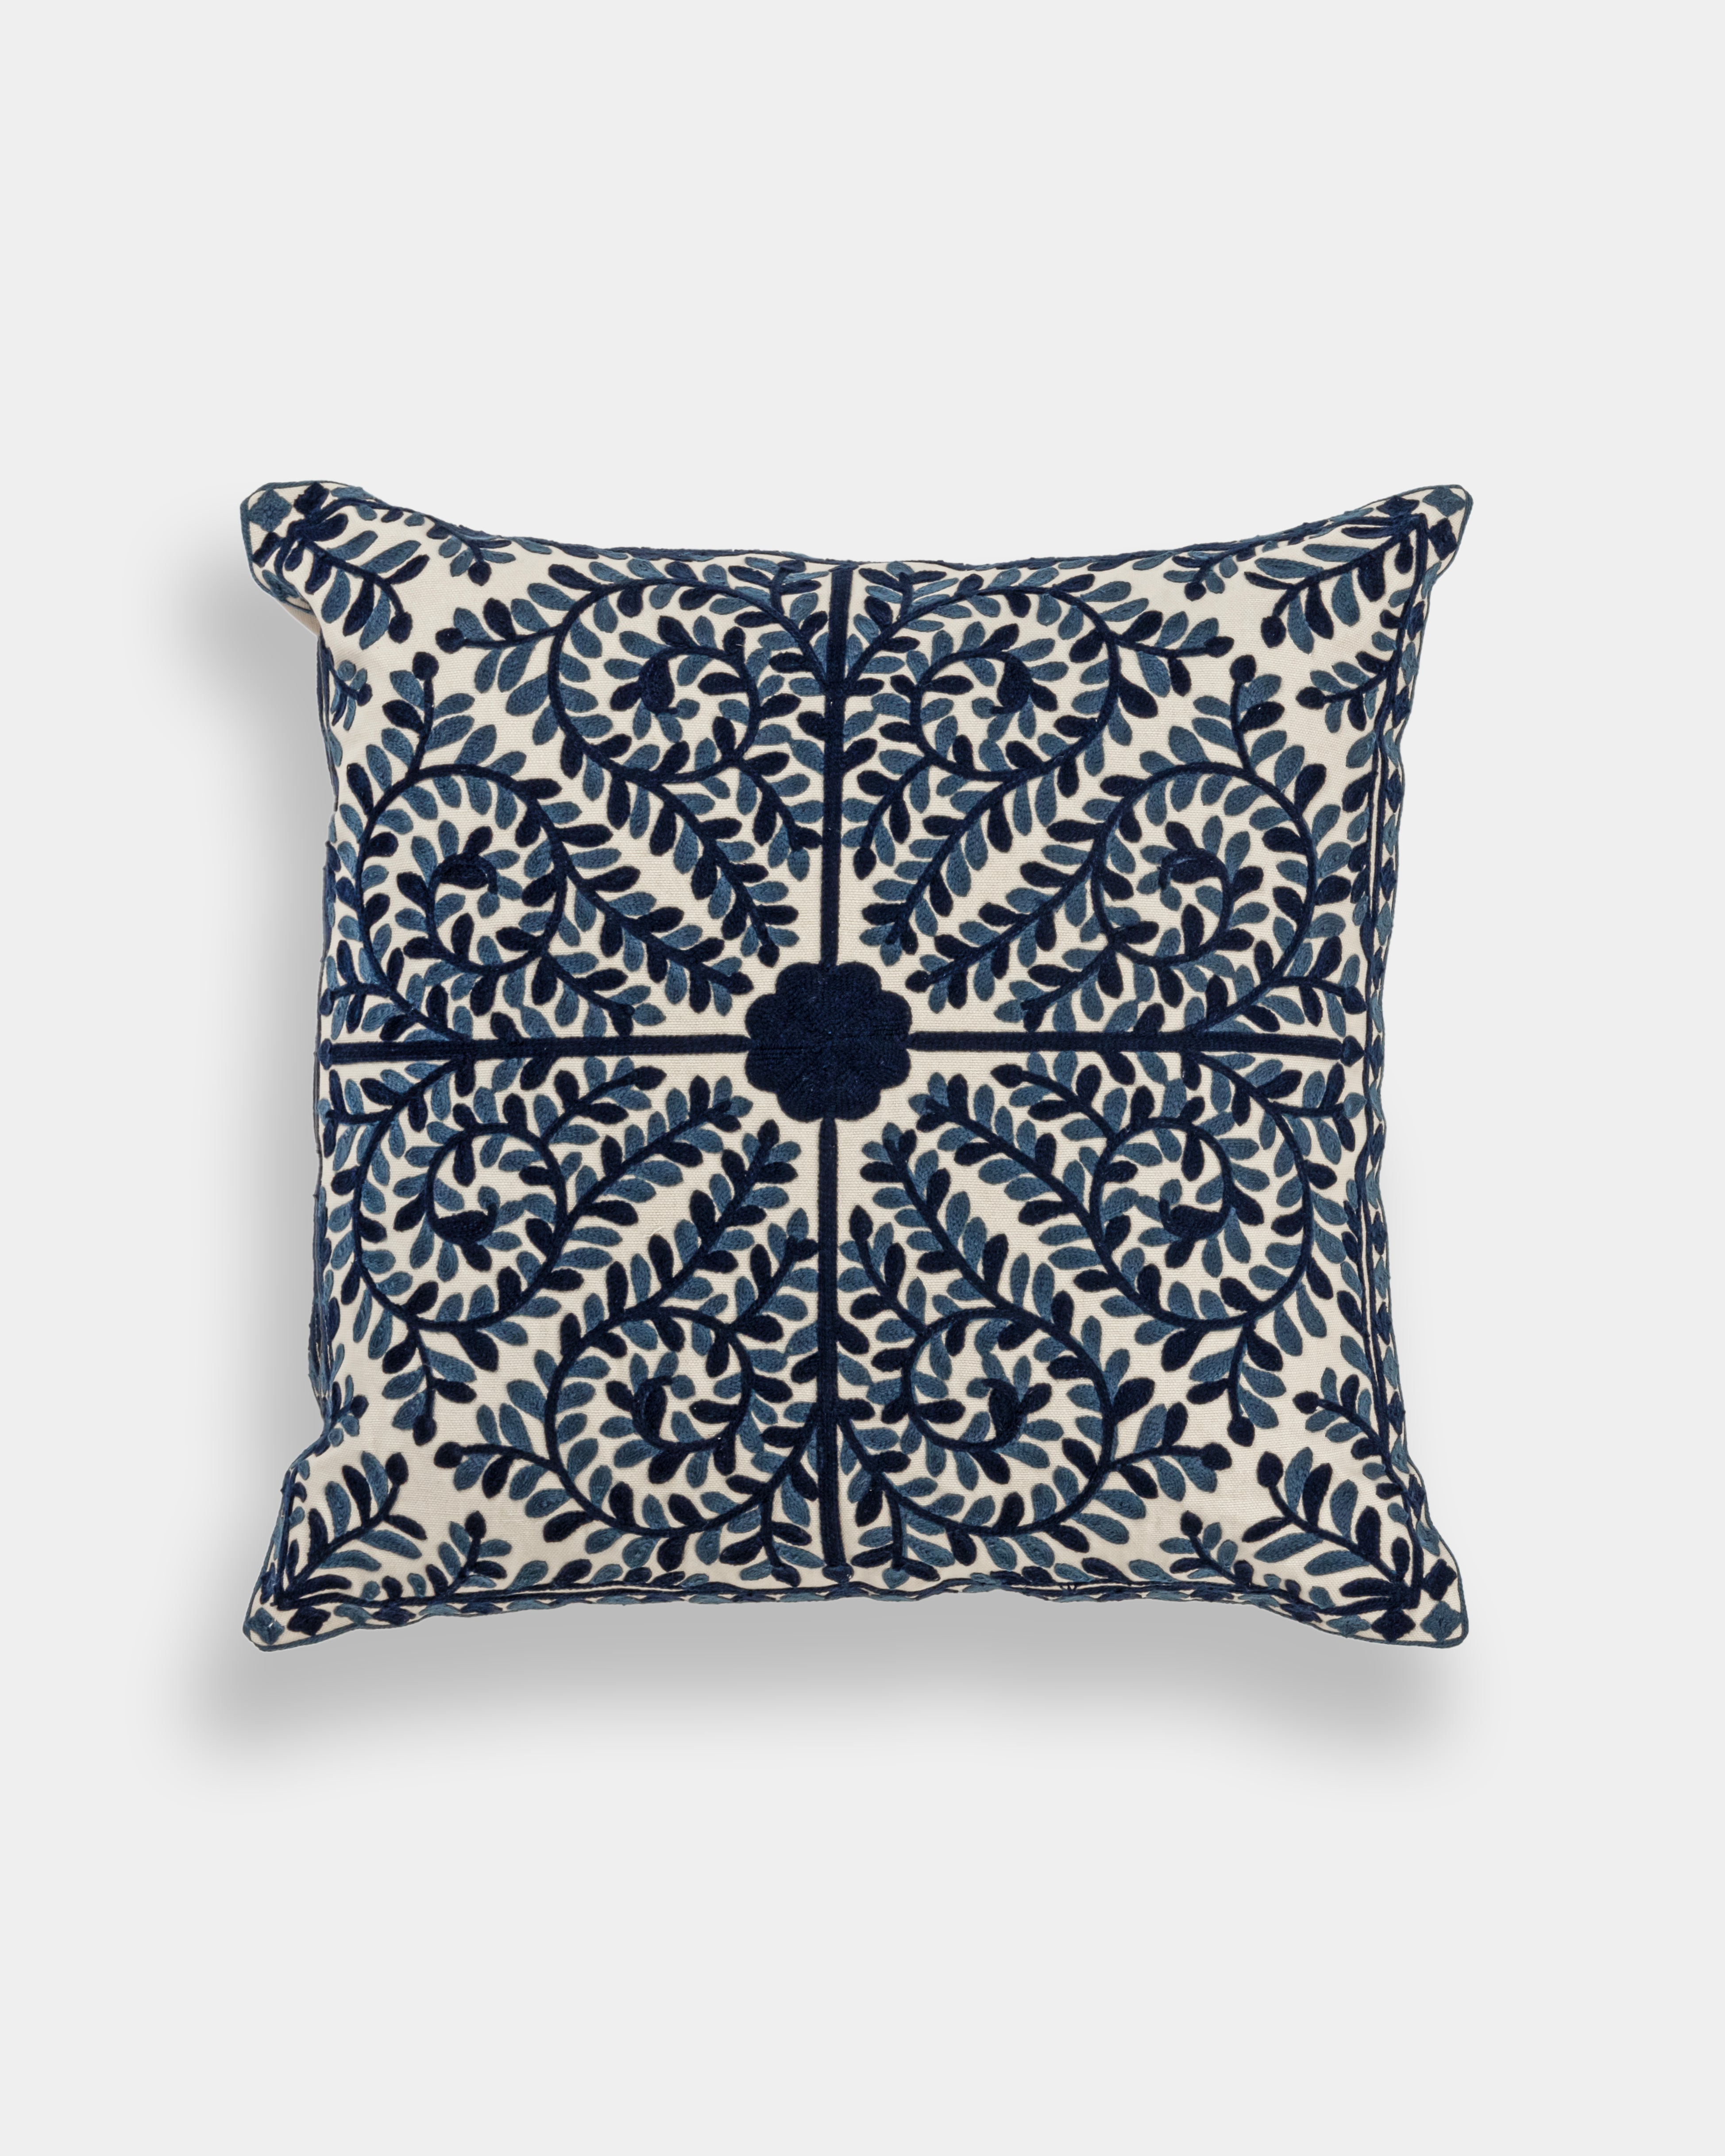 Suzani Pillow | Blue Pillow Cover Foliage 18x18" | Made in Jaipur